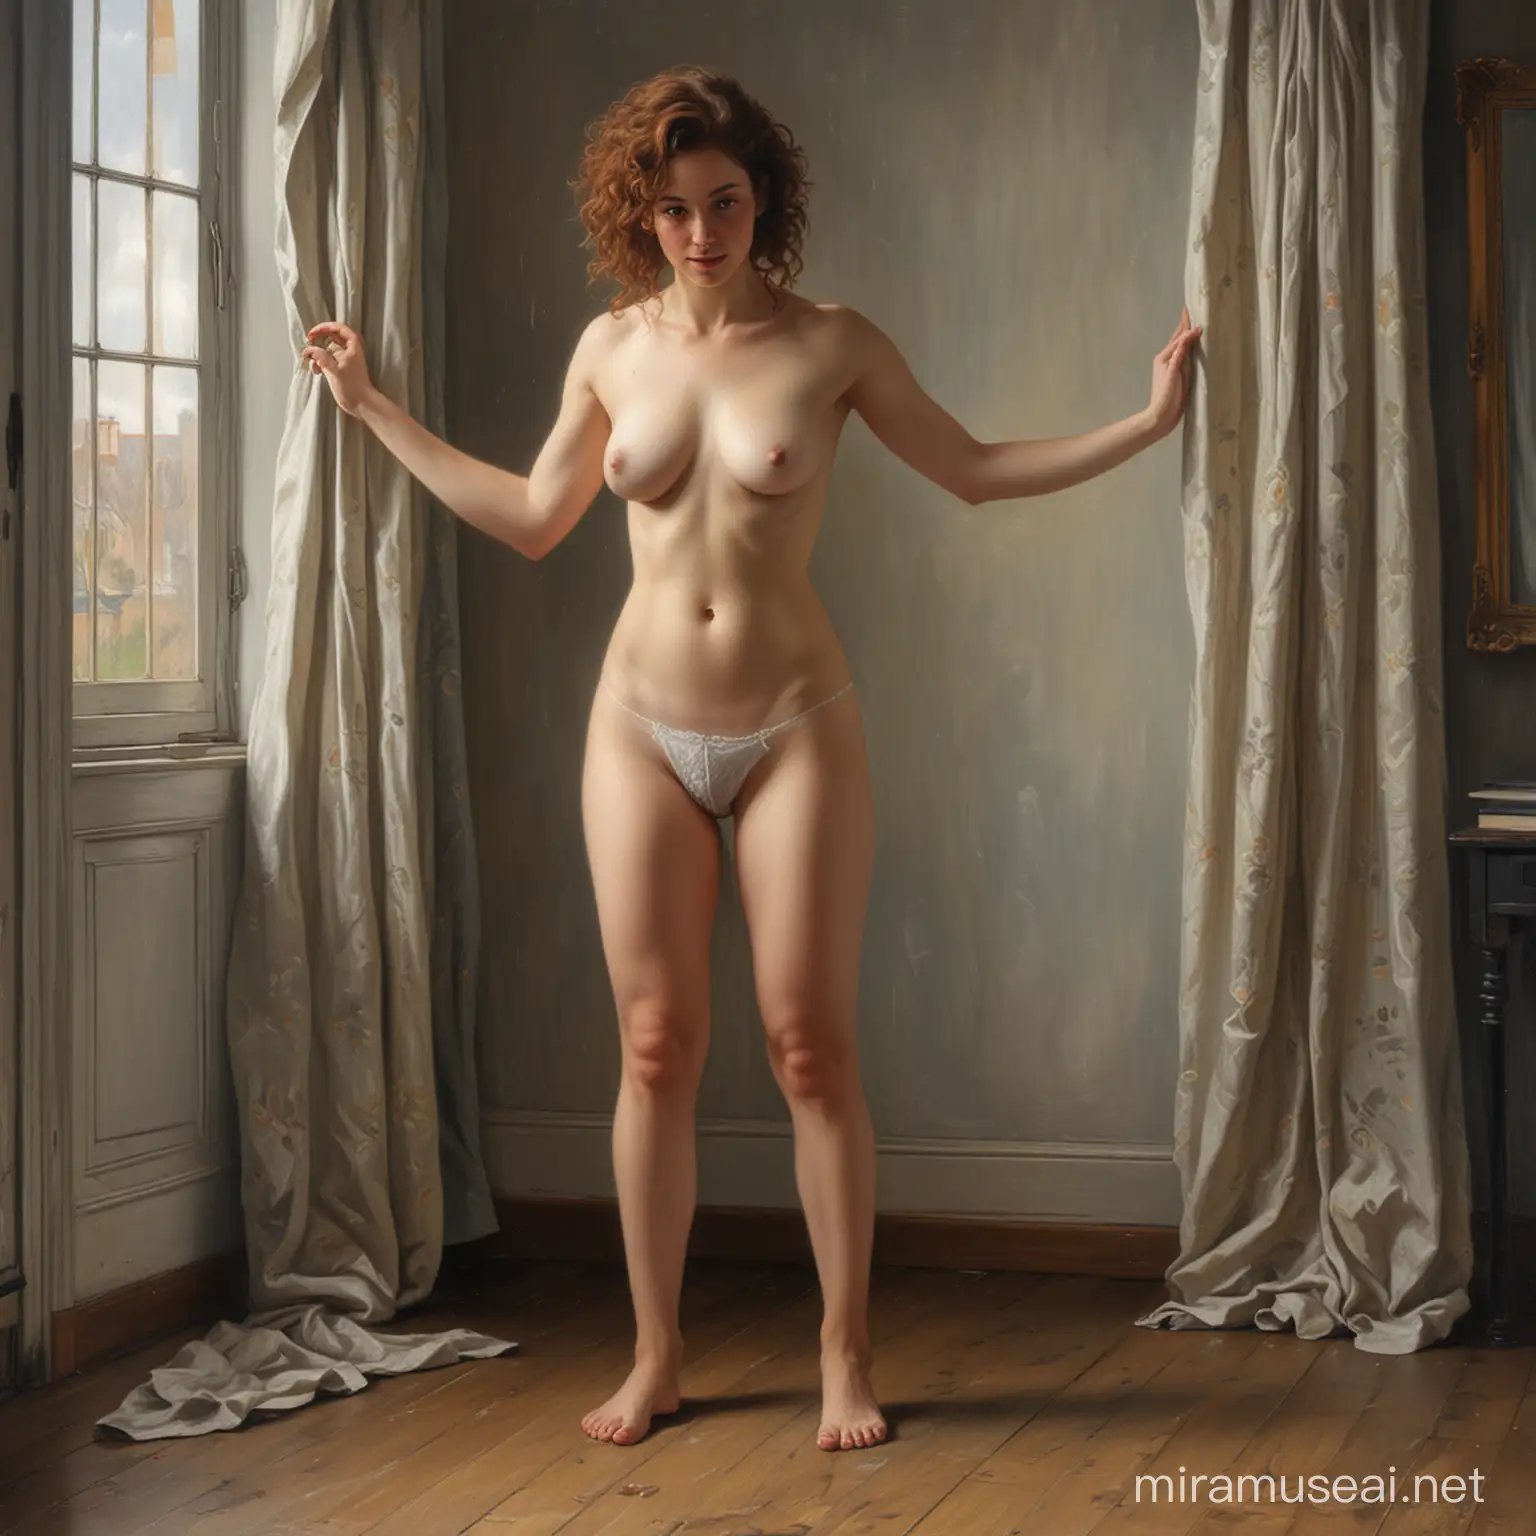 Highly detailed 19th century oil painting, a full-length portrait of an erotic woman, sHe has short curly dark auburn hair and full beard and a soft downy body, sHe wears only dark grey trousers to his knees, she has bare shoulders and feet, her face is calm, she stands on a wooden floor in a room lit by a a window at one side, The light is soft, muted colours, fine brushstrokes, she holds her hands up